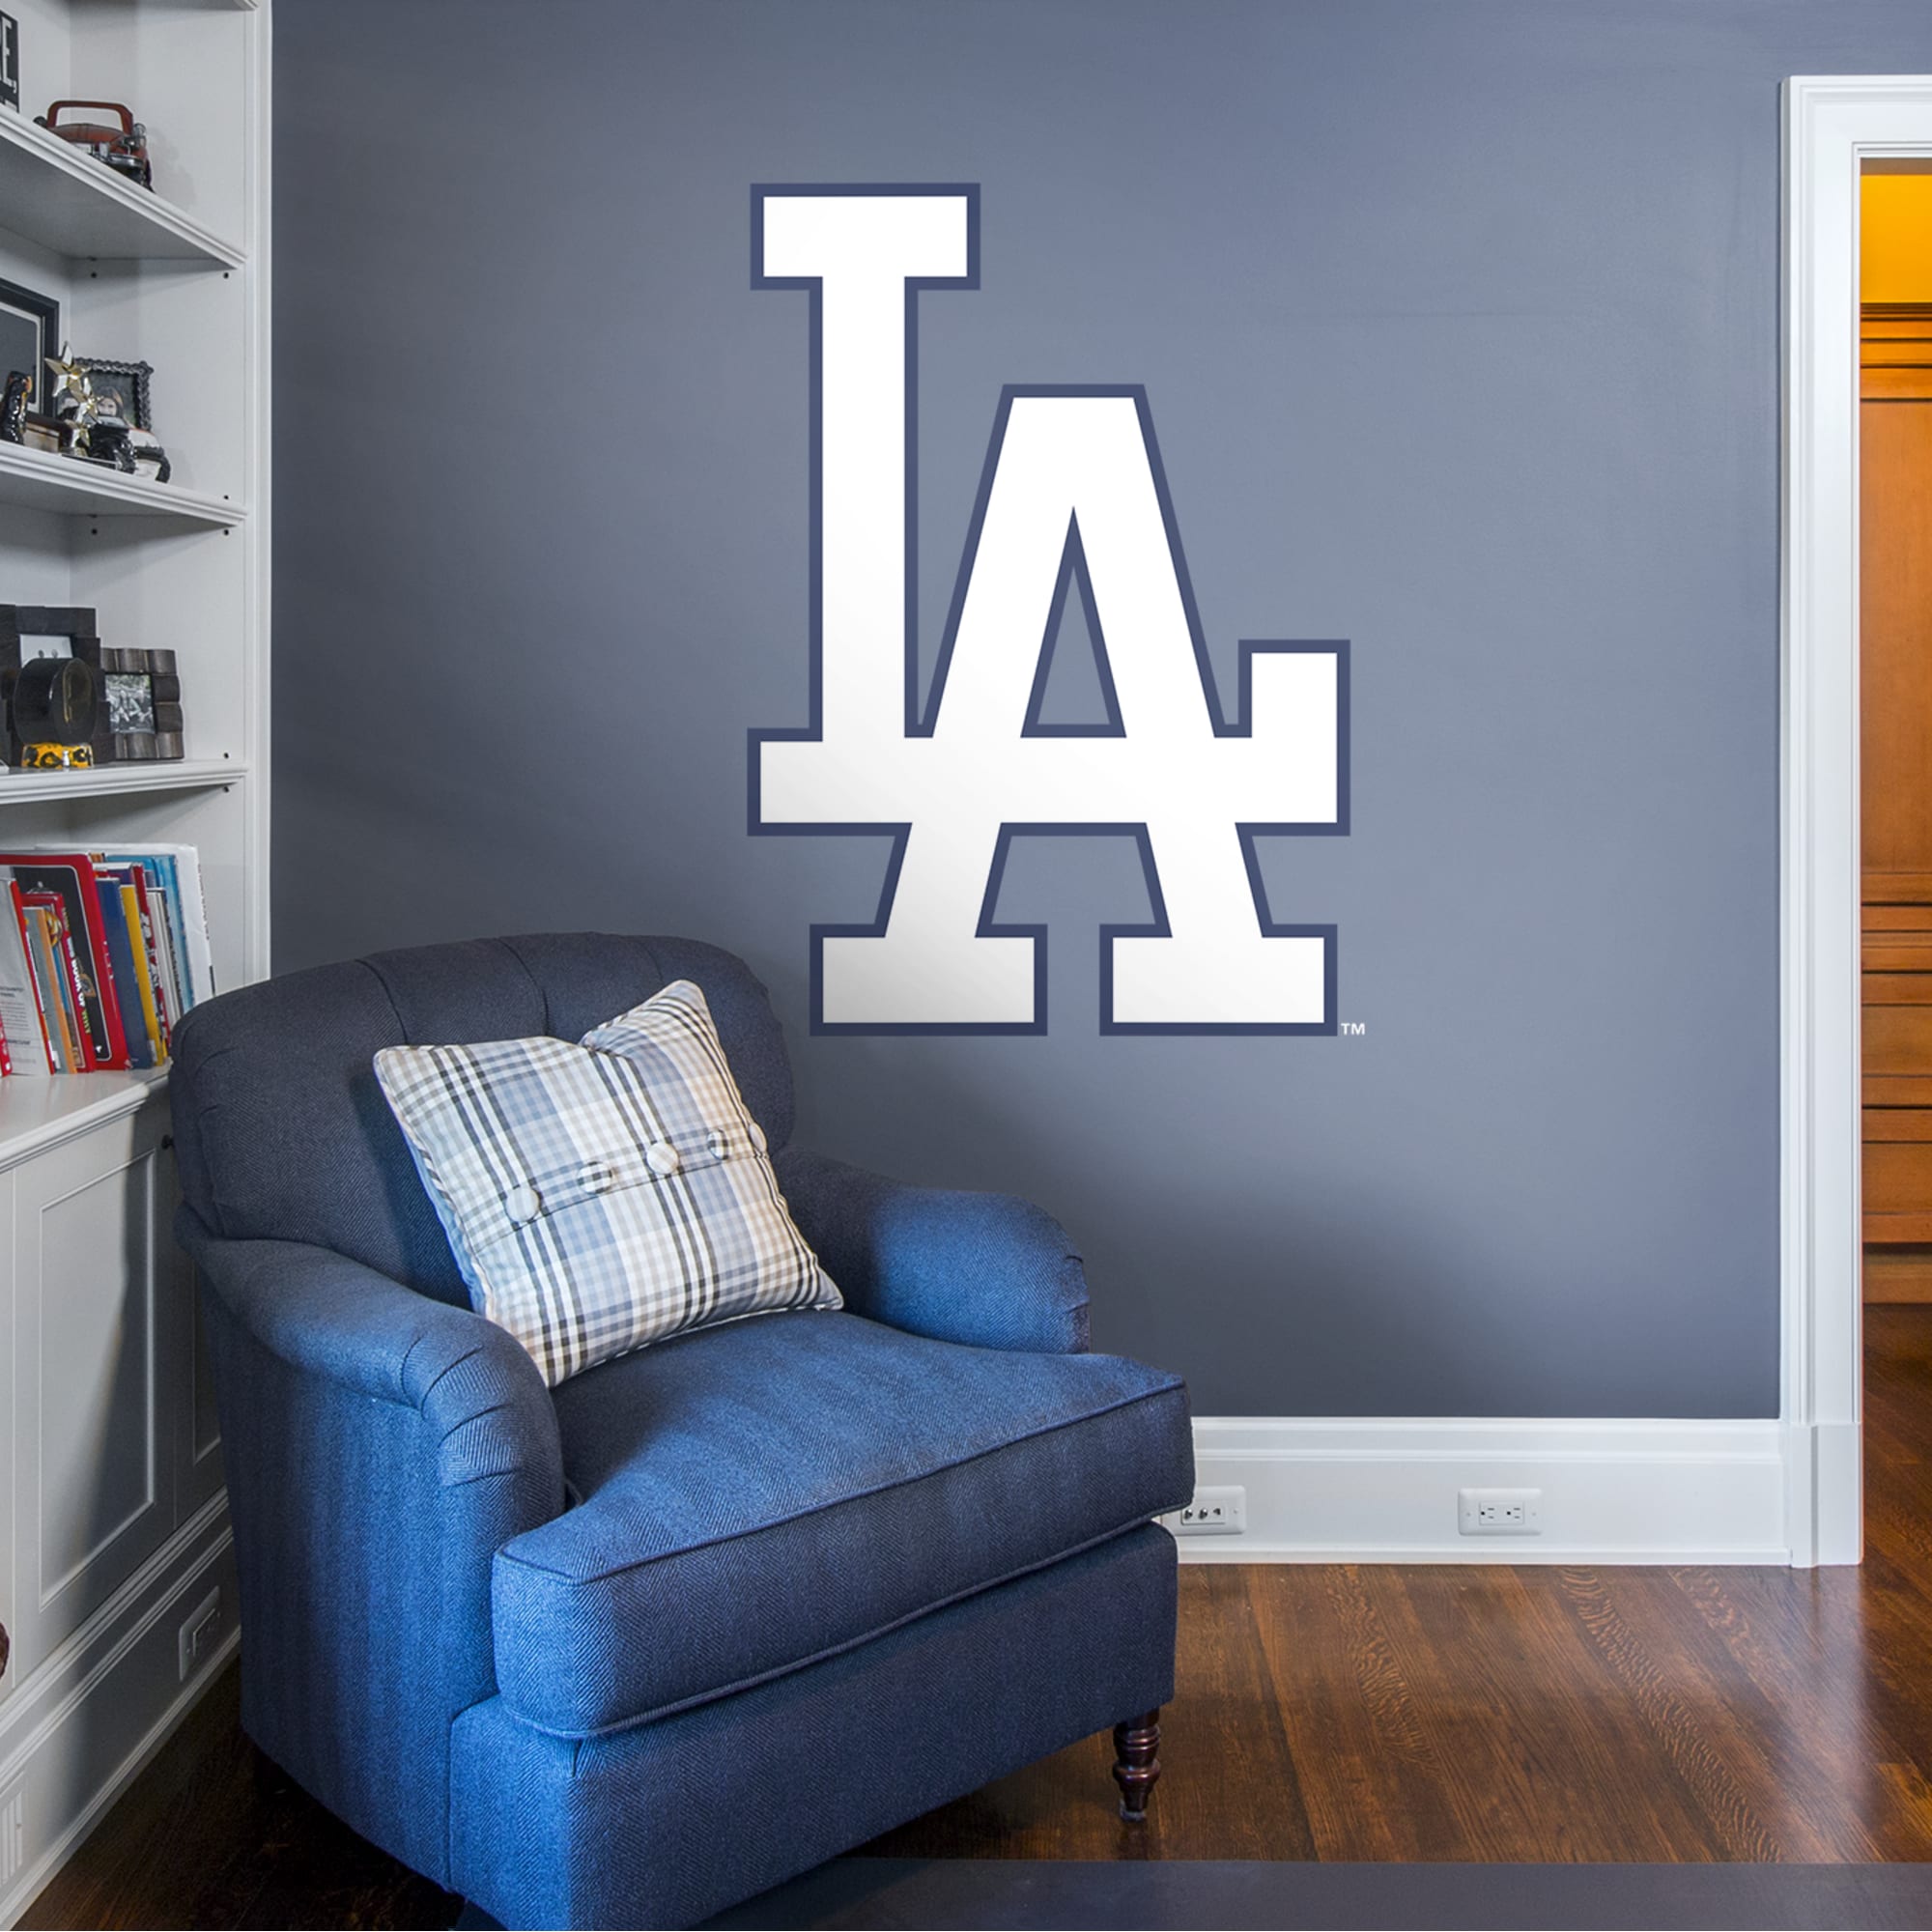 Los Angeles Dodgers: Alternate Logo - Officially Licensed MLB Removable Wall Decal 36.0"W x 51.0"H by Fathead | Vinyl